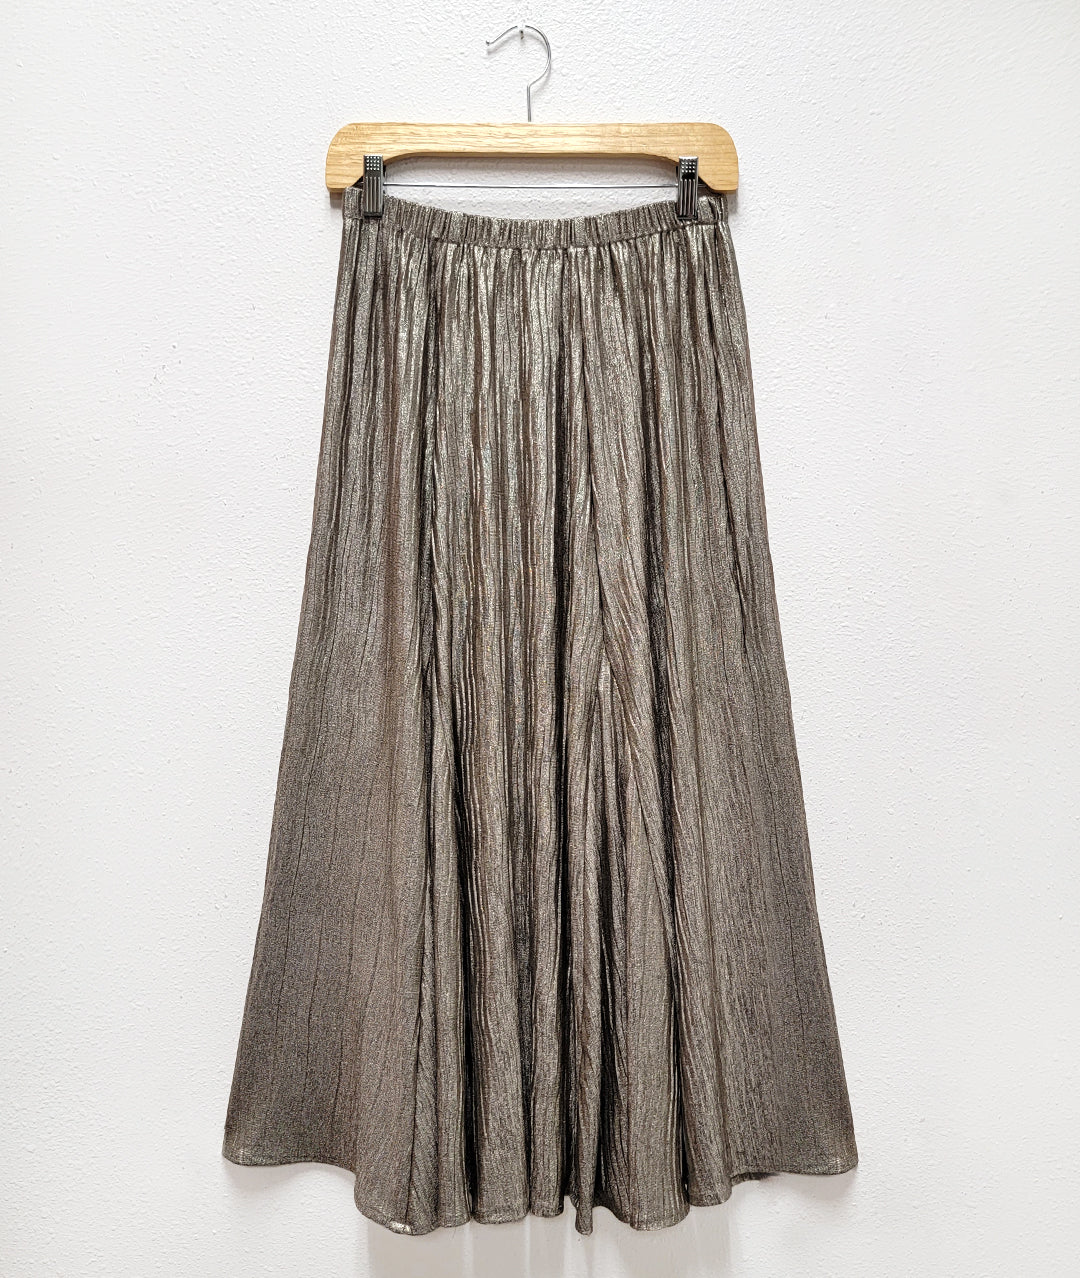 gold lame ankle length skirt with an elastic waistband, princess seams and full godets 